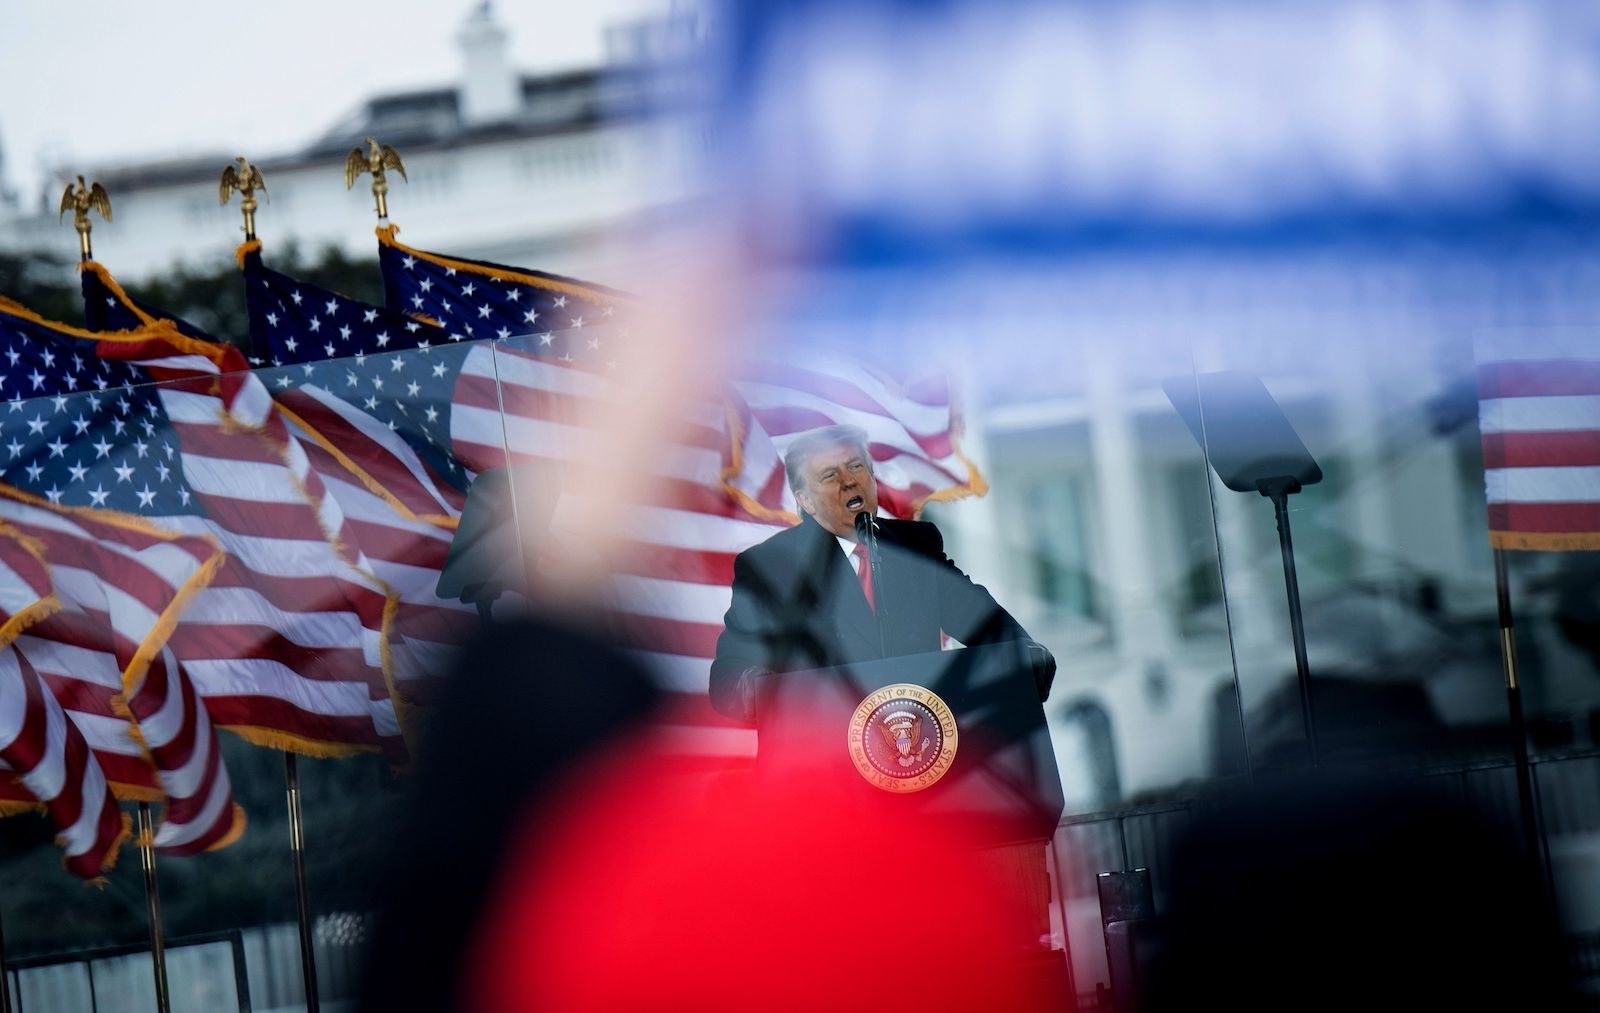 Trump stands behind a lectern with a presidential seal, in front of US flags waving in the wind; in the foreground, out-of-focus supporters wave signs and flags